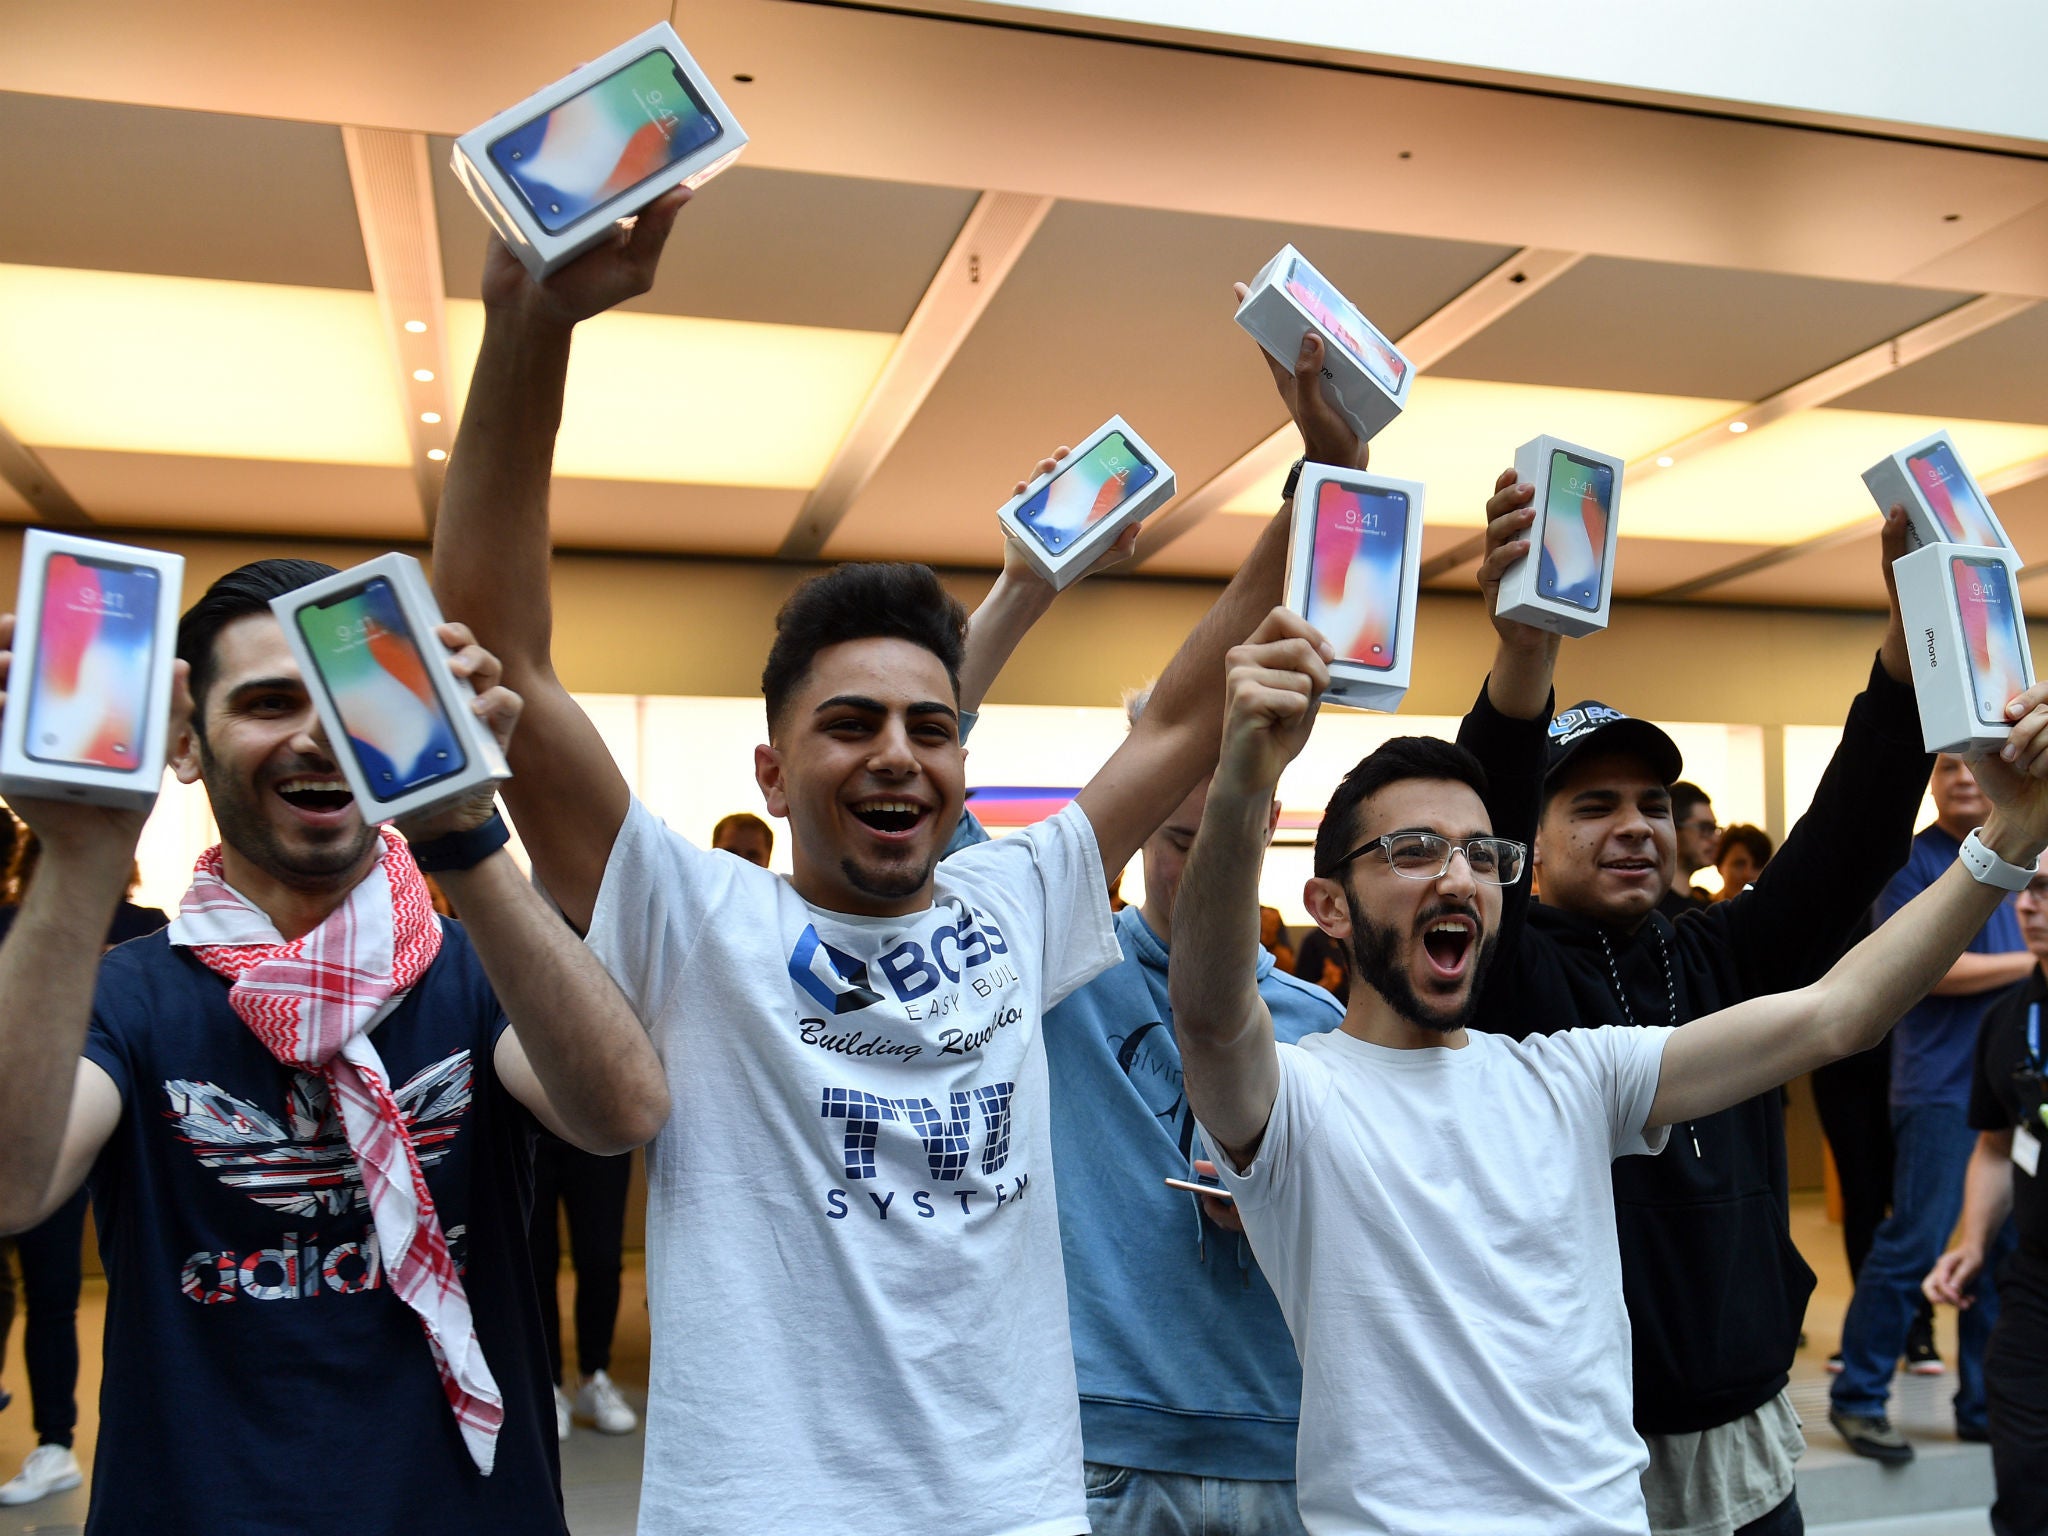 The first customers at an Apple showroom in Sydney display their iPhone X purchases